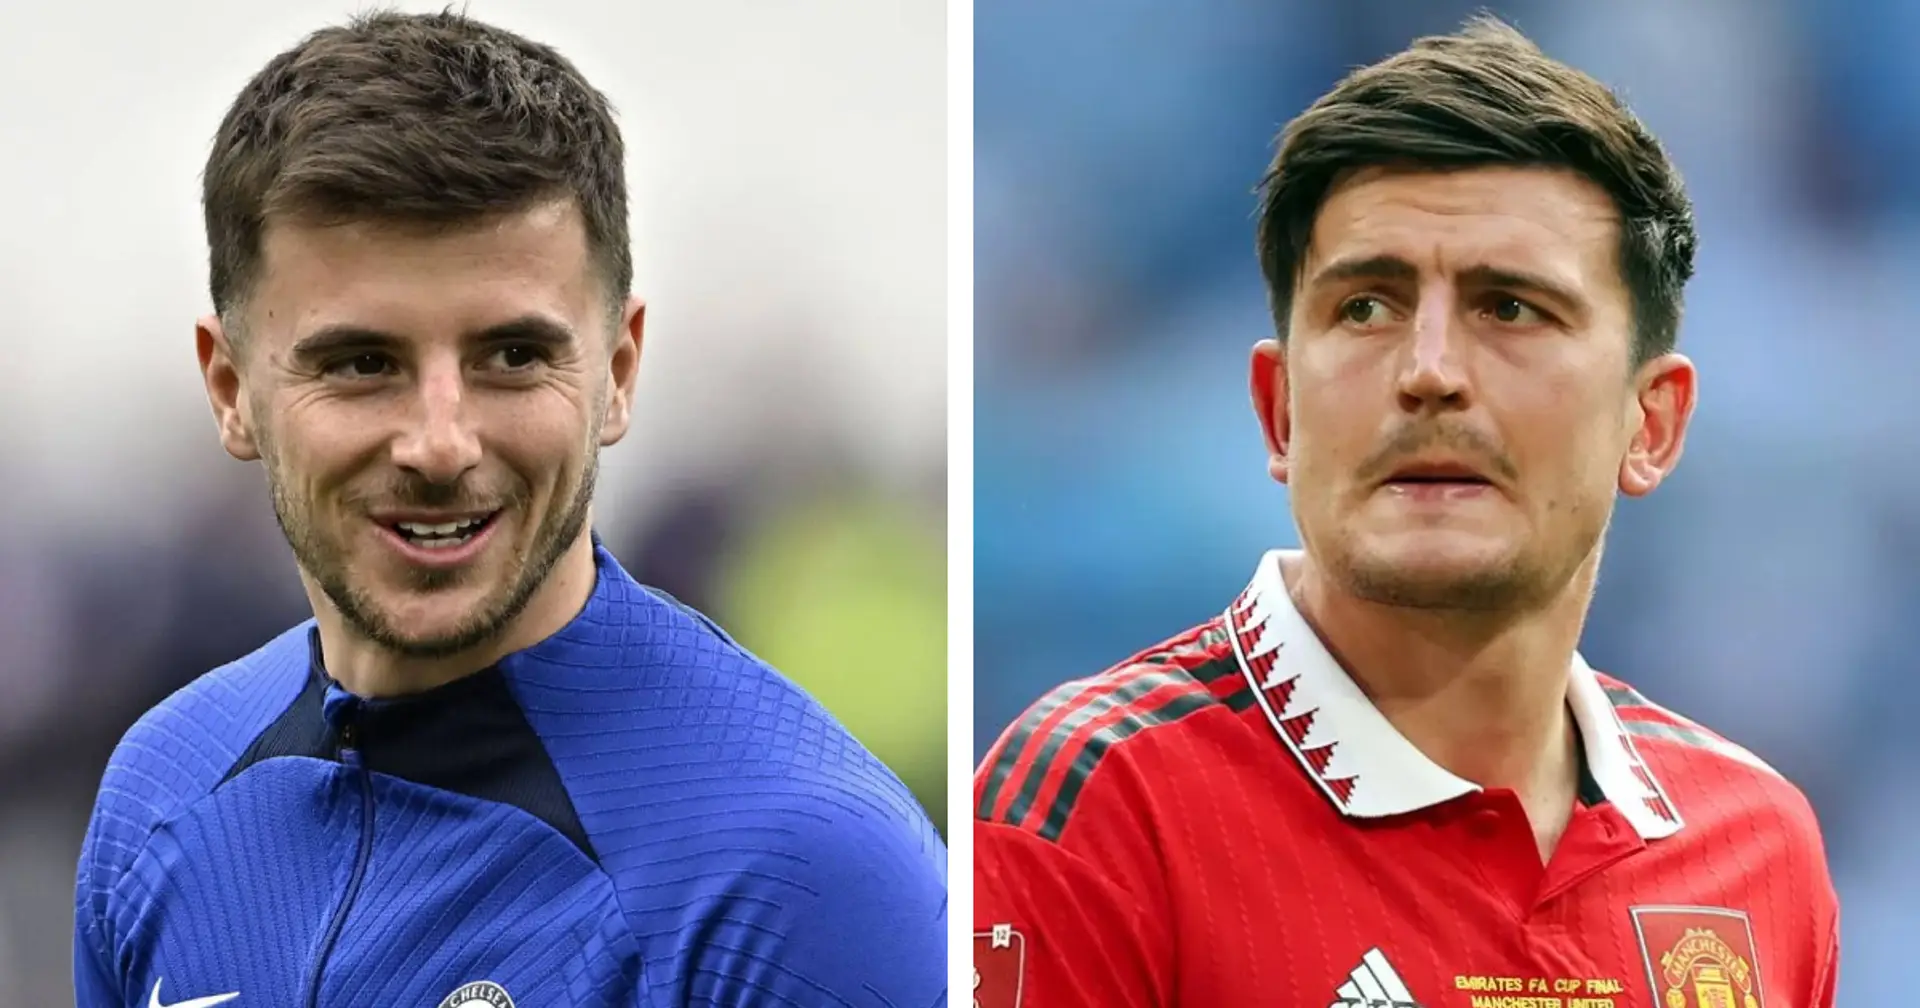 'He gets away with a lot because he's nice and smiley': Man United warned Mason Mount could be another Harry Maguire